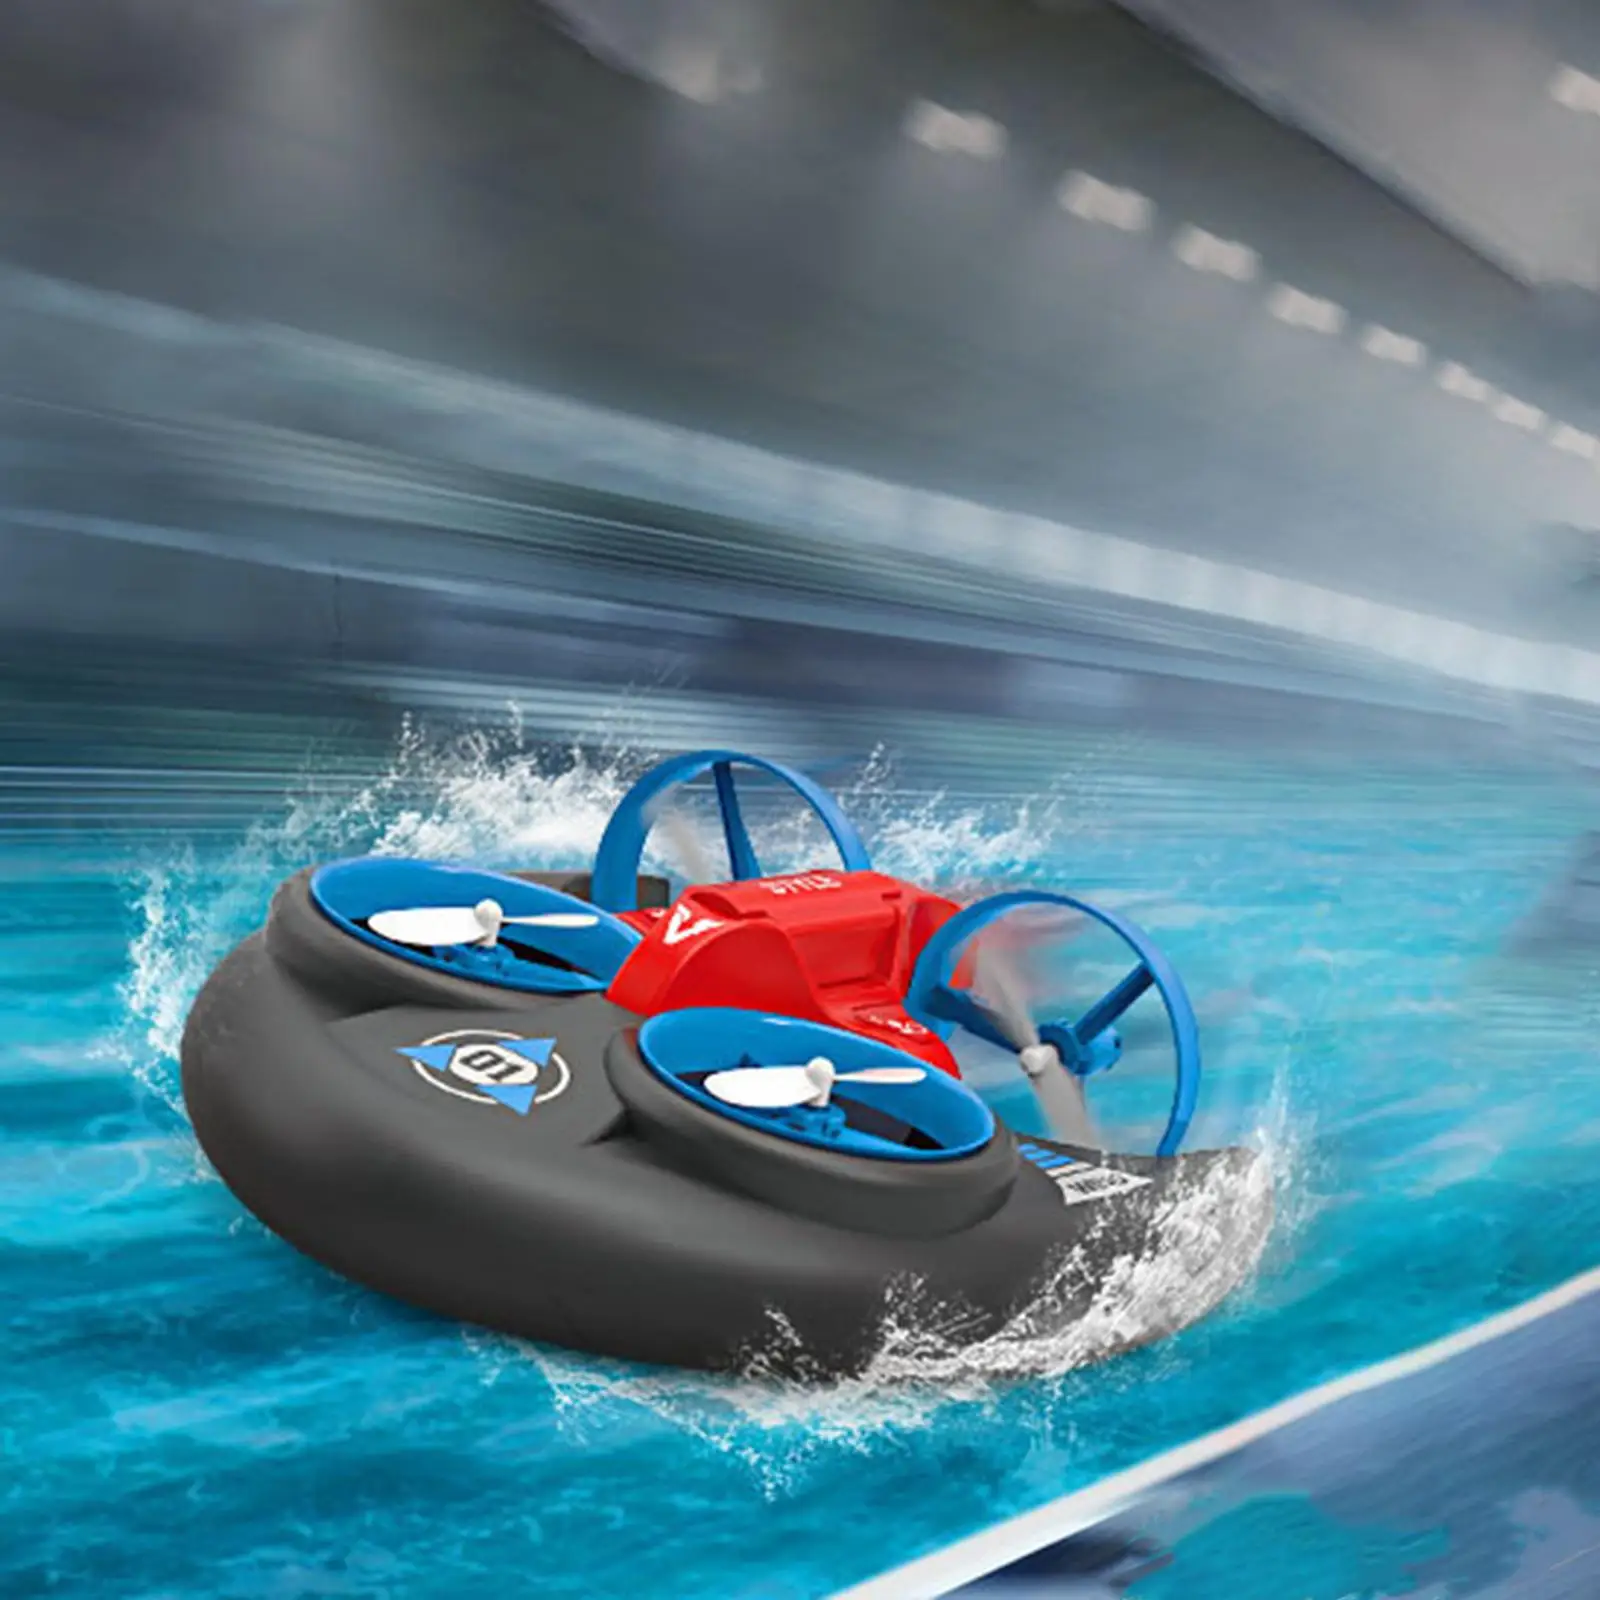 Mini , Rechargeable 6CH 3D Flying Hovercraft   Mode, for Children Beginners